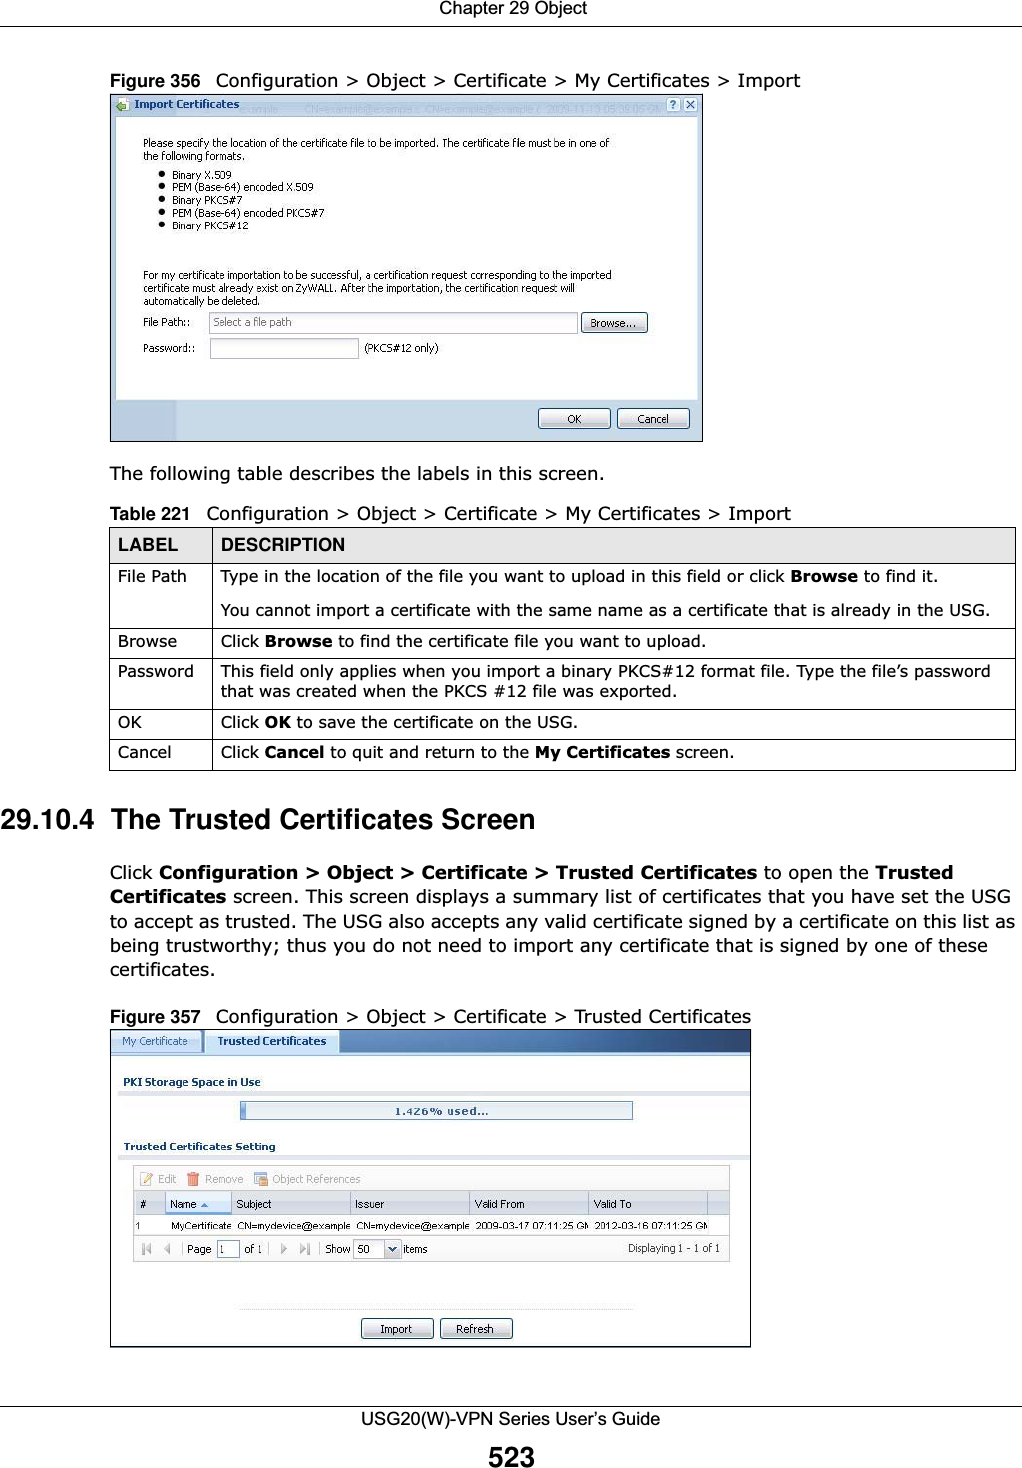  Chapter 29 ObjectUSG20(W)-VPN Series User’s Guide523Figure 356   Configuration &gt; Object &gt; Certificate &gt; My Certificates &gt; ImportThe following table describes the labels in this screen.  29.10.4  The Trusted Certificates ScreenClick Configuration &gt; Object &gt; Certificate &gt; Trusted Certificates to open the Trusted Certificates screen. This screen displays a summary list of certificates that you have set the USG to accept as trusted. The USG also accepts any valid certificate signed by a certificate on this list as being trustworthy; thus you do not need to import any certificate that is signed by one of these certificates. Figure 357   Configuration &gt; Object &gt; Certificate &gt; Trusted Certificates Table 221   Configuration &gt; Object &gt; Certificate &gt; My Certificates &gt; ImportLABEL DESCRIPTIONFile Path  Type in the location of the file you want to upload in this field or click Browse to find it.You cannot import a certificate with the same name as a certificate that is already in the USG.Browse Click Browse to find the certificate file you want to upload. Password This field only applies when you import a binary PKCS#12 format file. Type the file’s password that was created when the PKCS #12 file was exported. OK Click OK to save the certificate on the USG.Cancel Click Cancel to quit and return to the My Certificates screen.